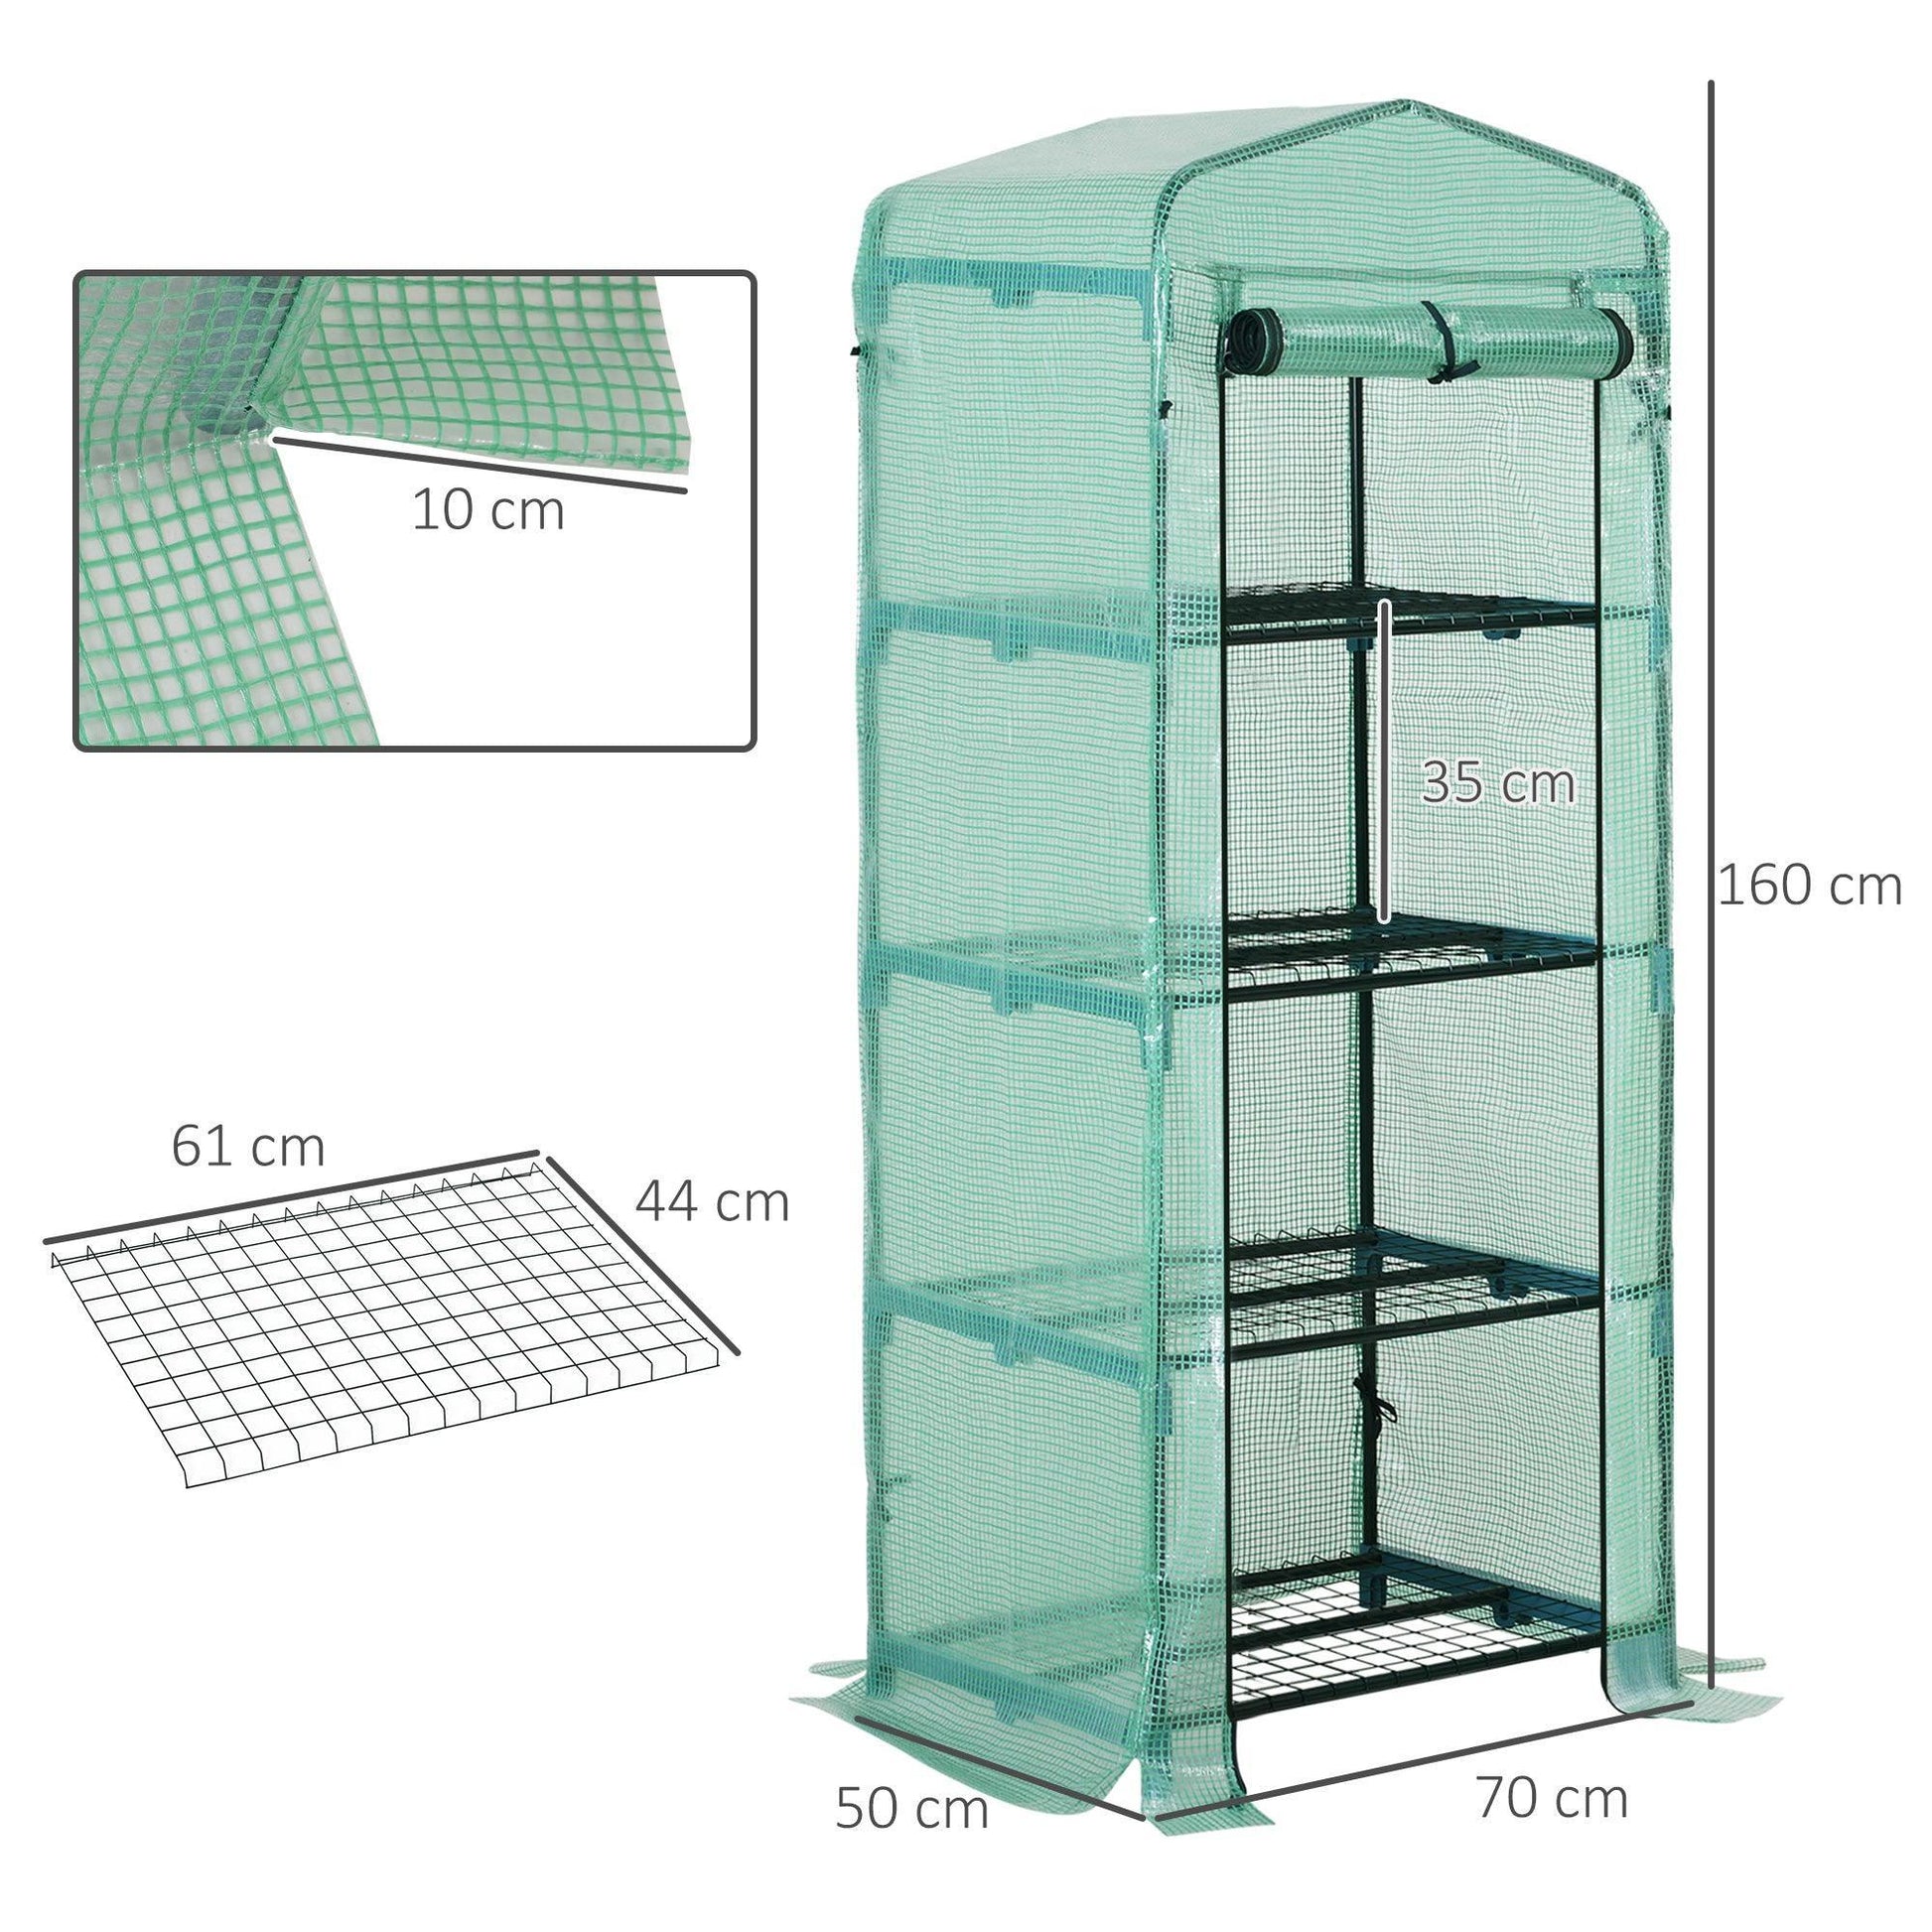 Outsunny Portable Greenhouse Shed - 4 Tiers, Metal Frame, PE Cover - ALL4U RETAILER LTD